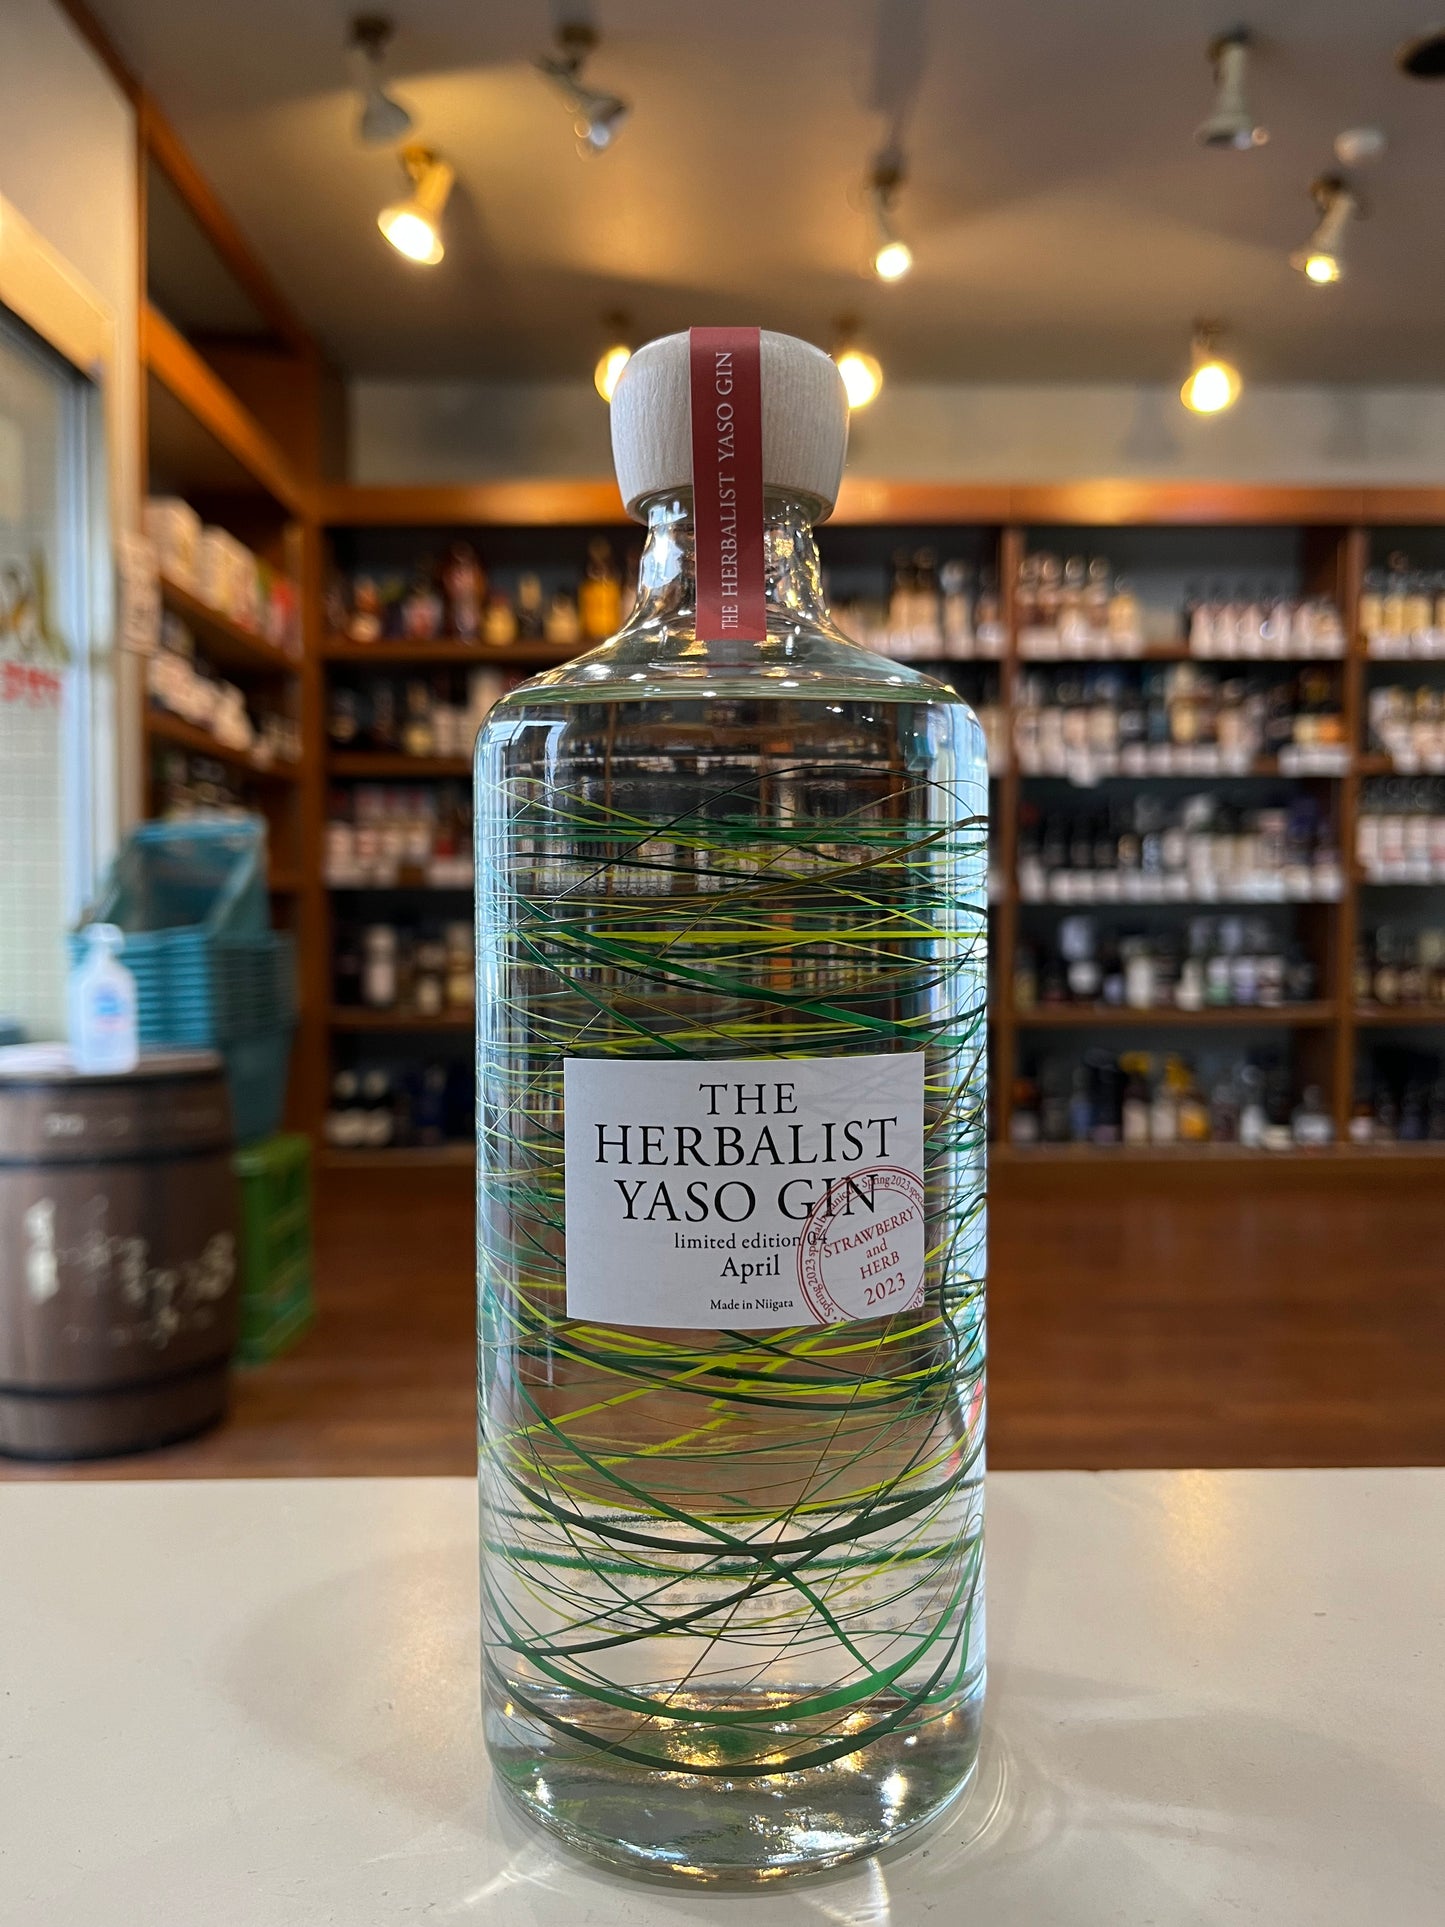 THE HERBALIST YASO GIN  limited edition 04 STRAWBERRY and HERB  ヤソ　ジン　ストロベリーハーブ